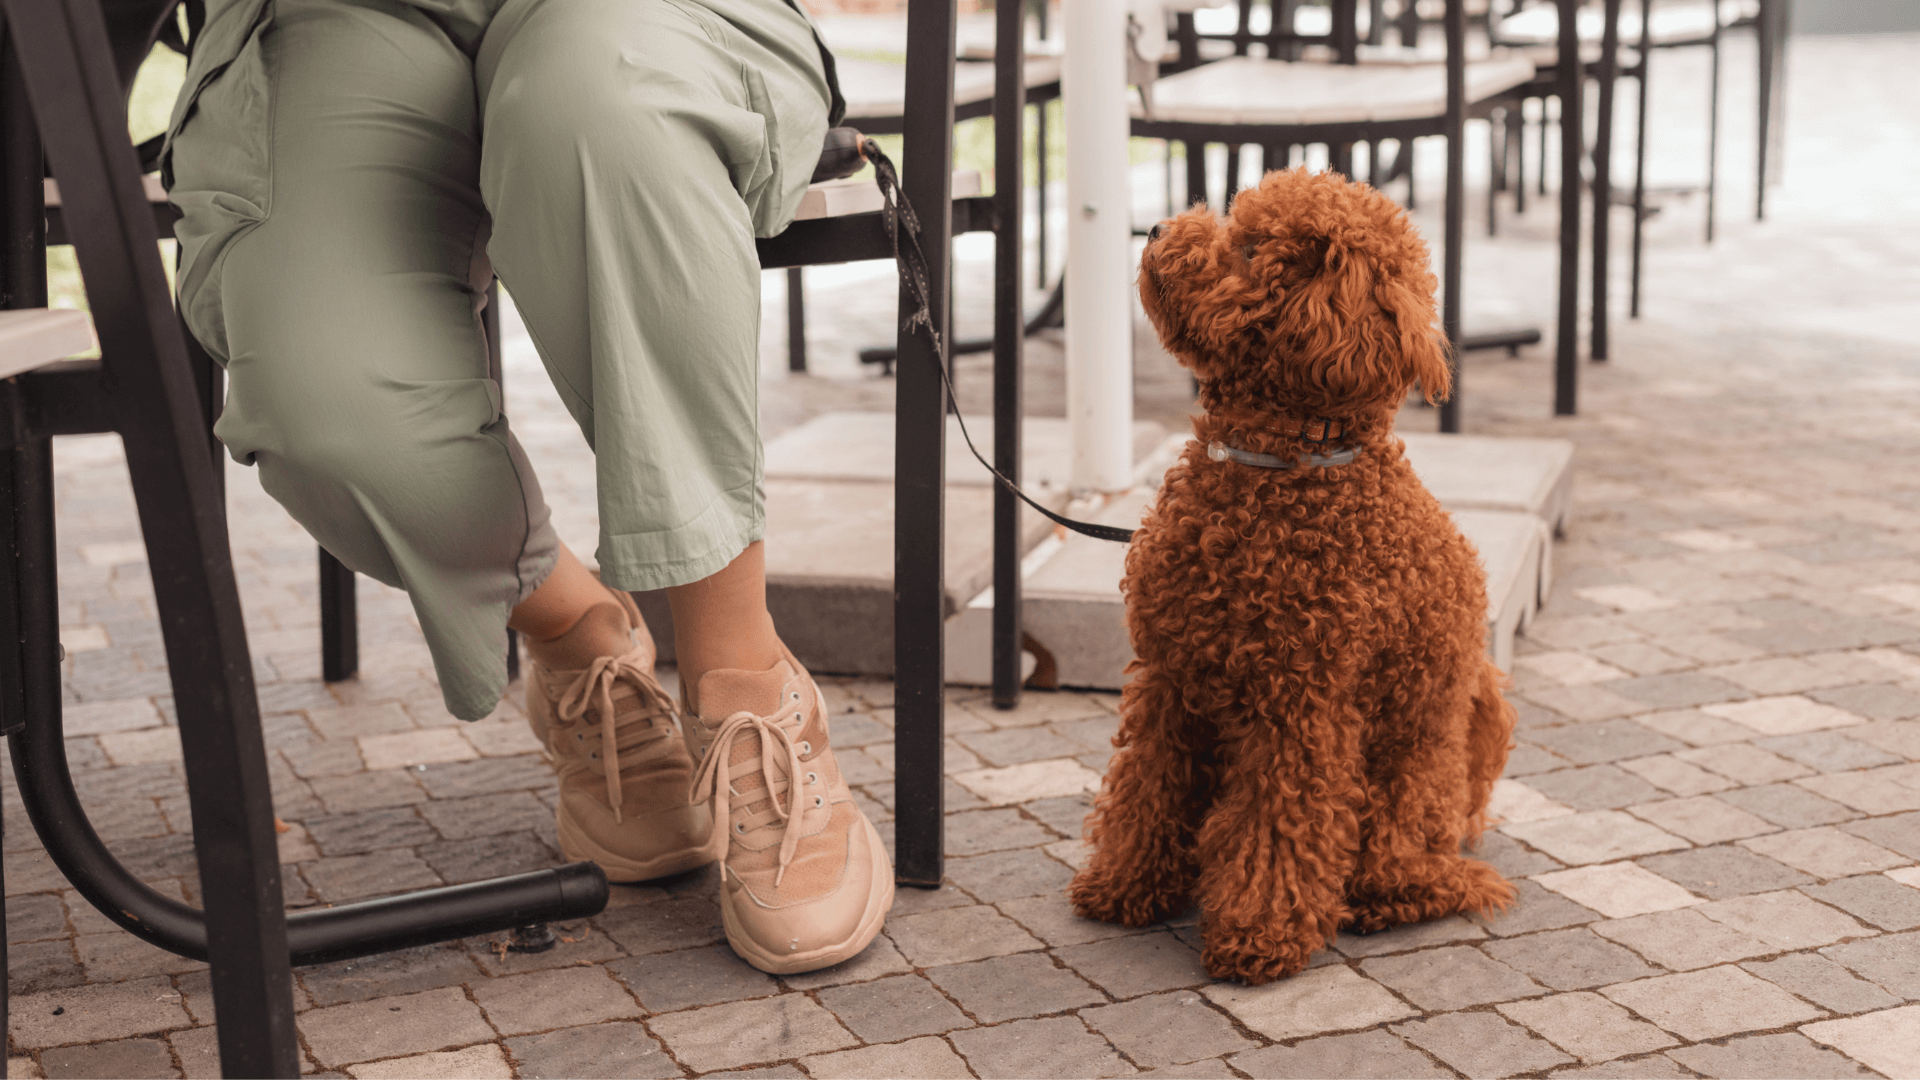 Pet Friendly places in SA